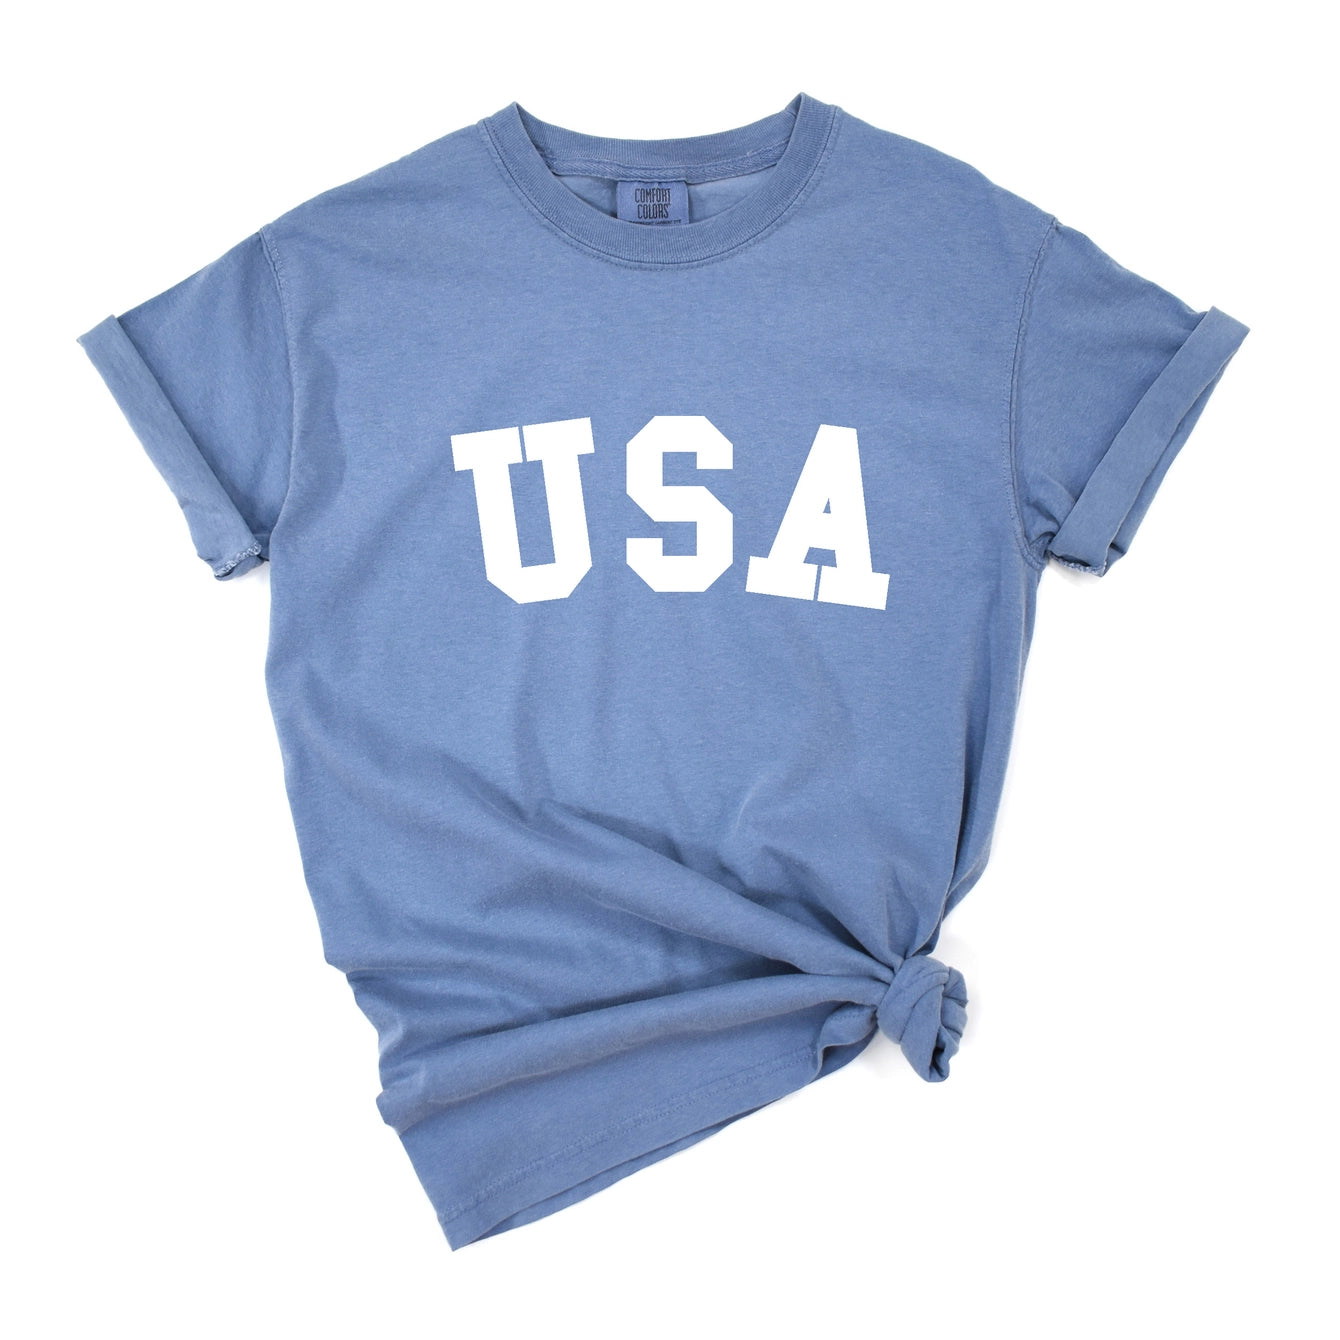 USA Comfort Colors Tee - 4th of July - Breckenridge Baby